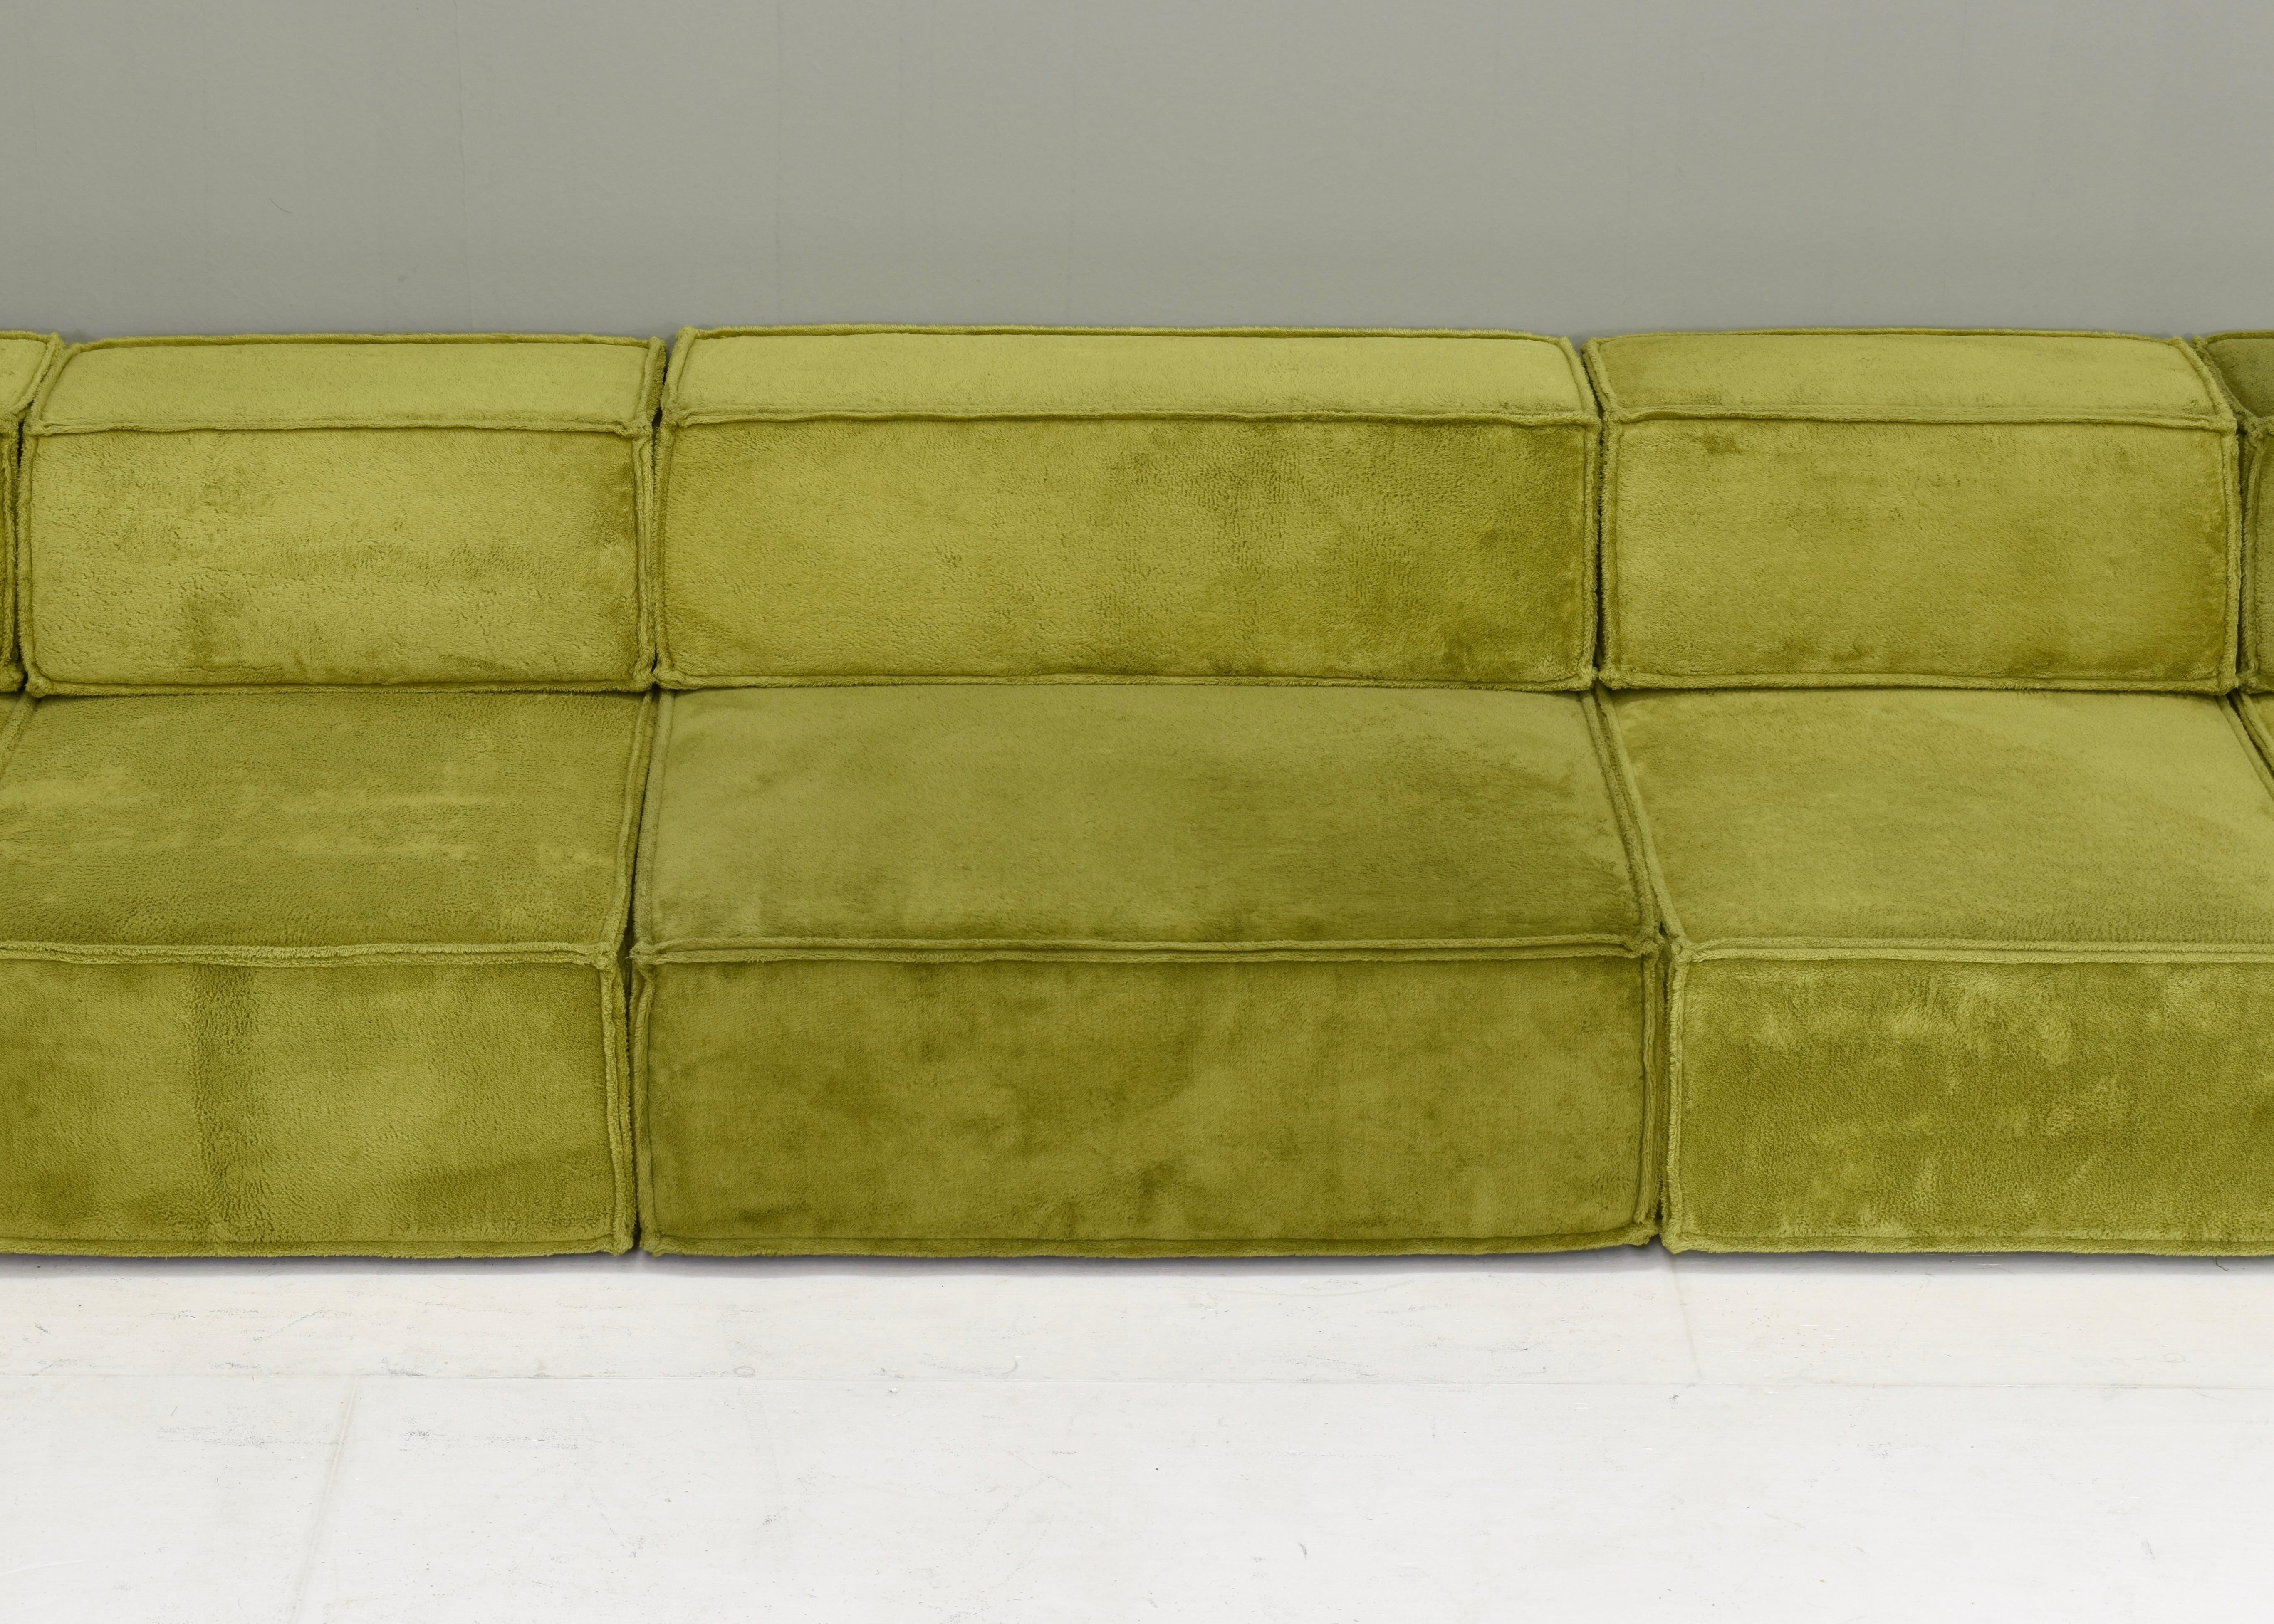 COR Trio Sectional Sofa by Team Form Ag for COR, Germany / Switzerland, 1972 13